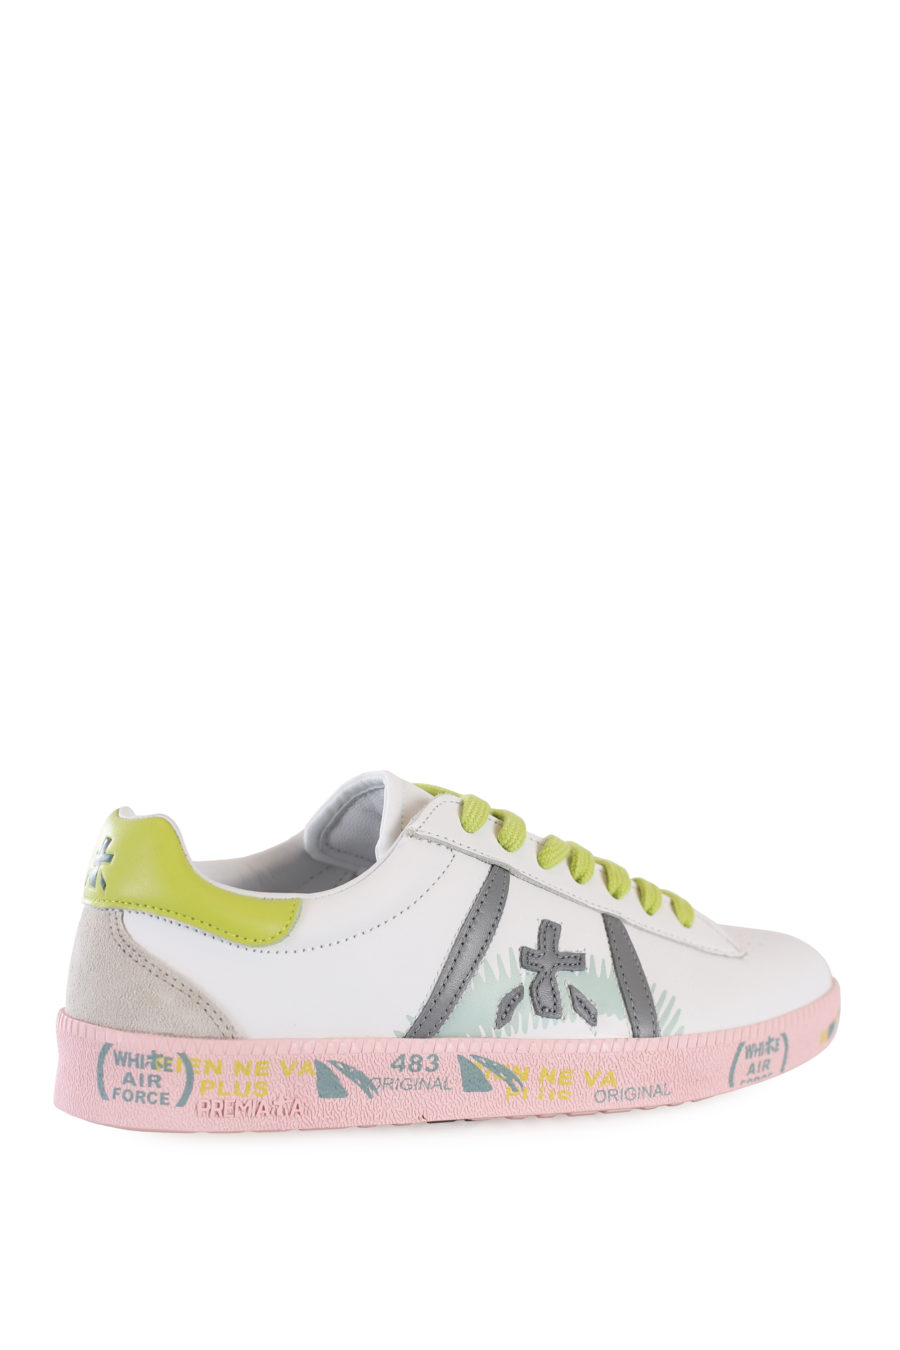 White trainers with green details and pink sole "Andyd" - IMG 1697